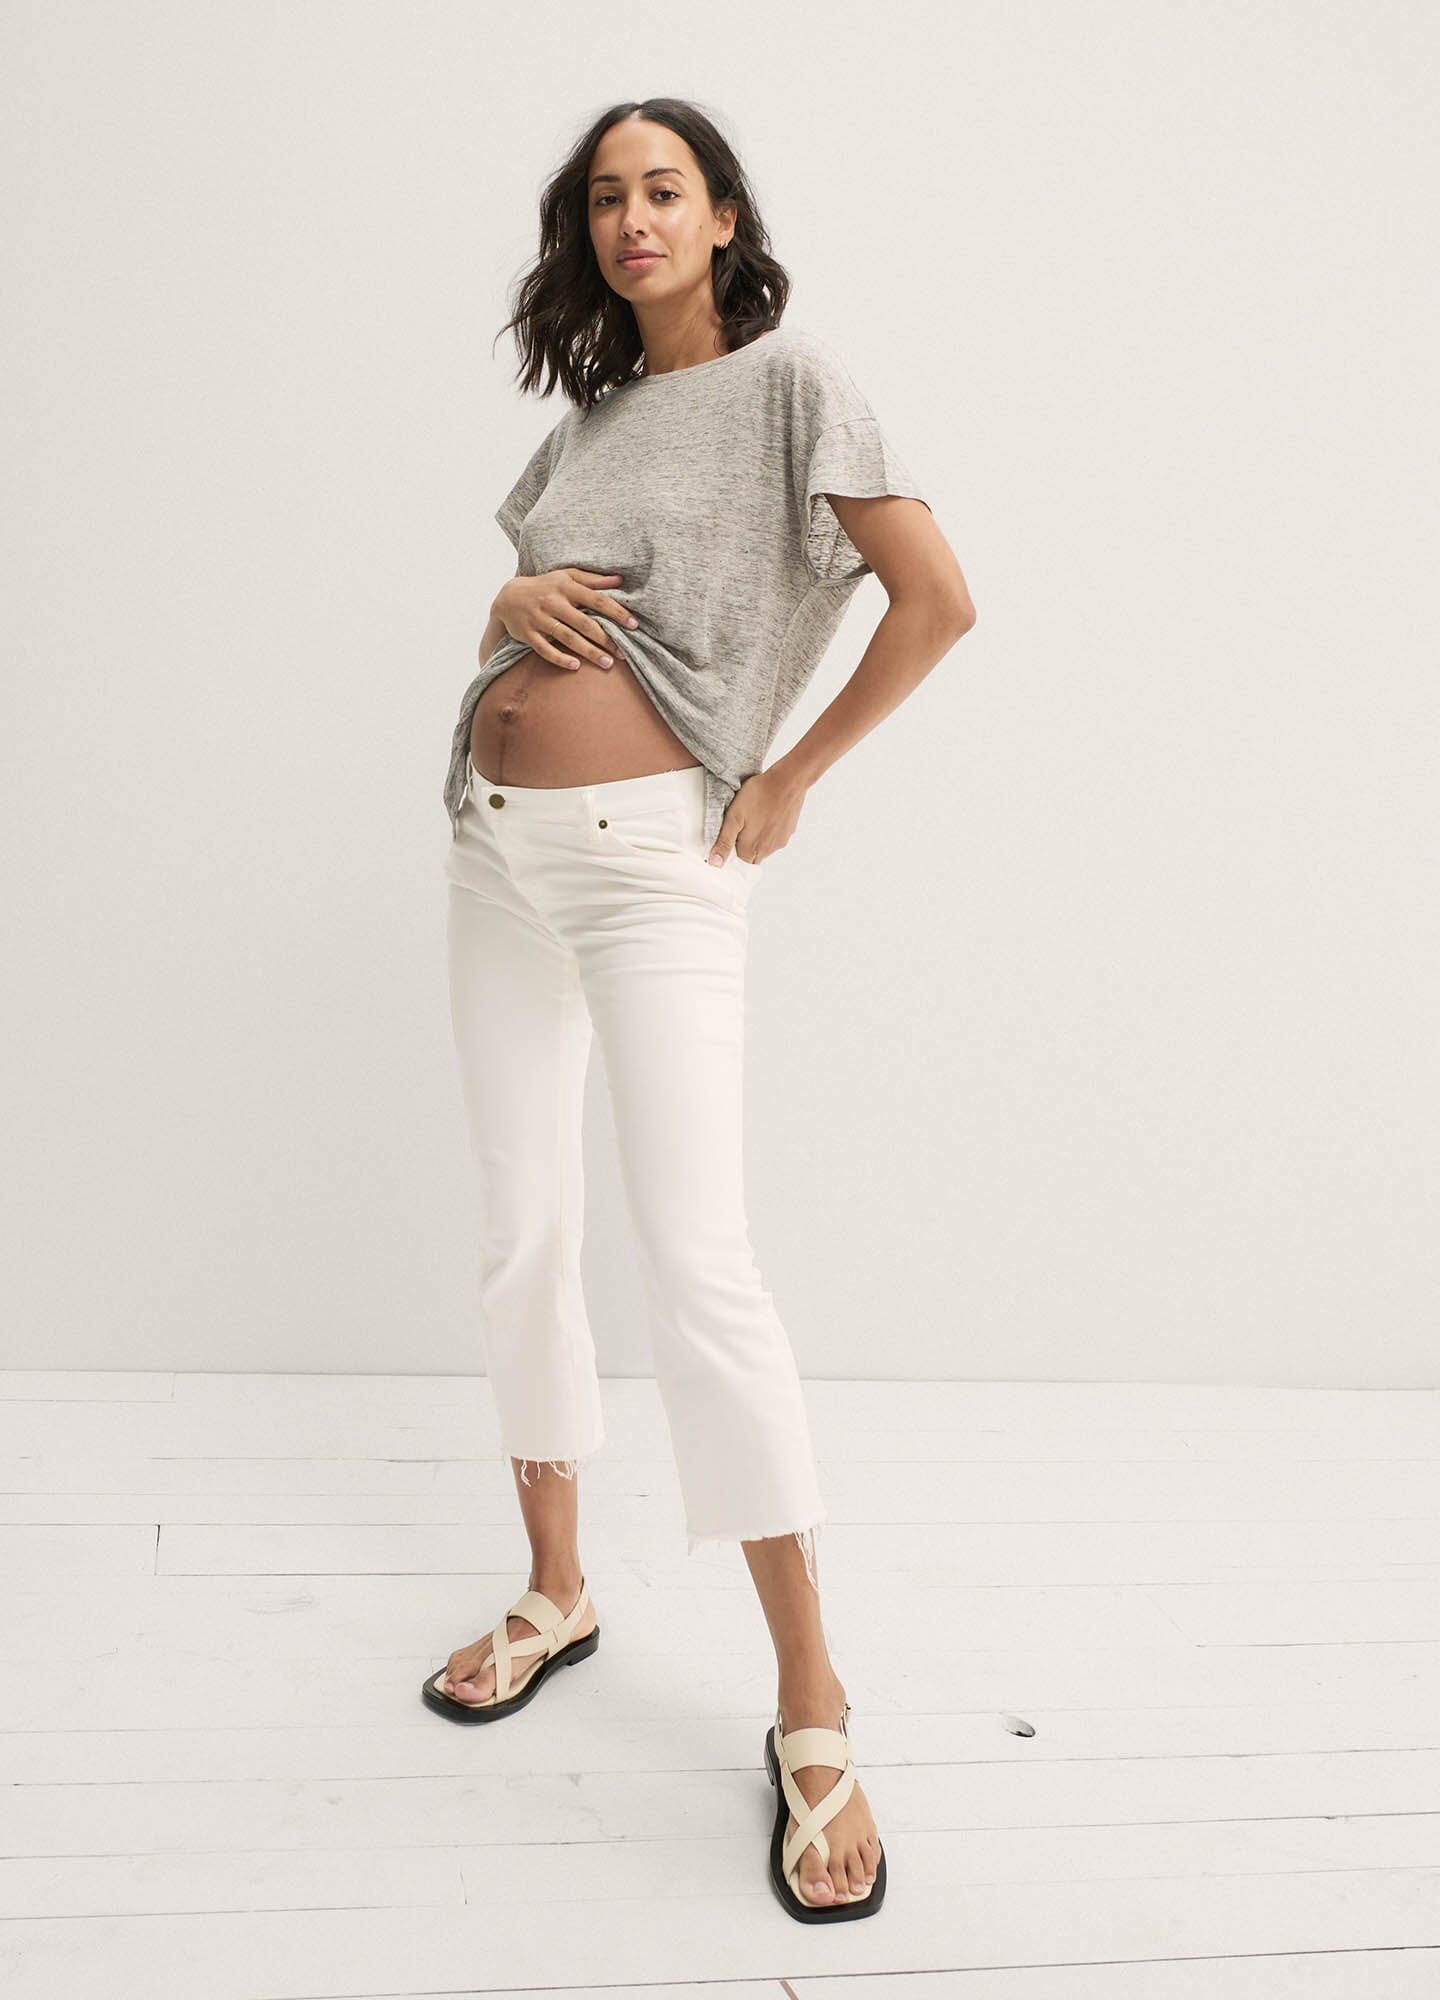 A natural guide to second trimester pregnancy essentials. Top picks for  maternity clothes, bath and body, work, and wellness to make your second  trimester as easy as possible.